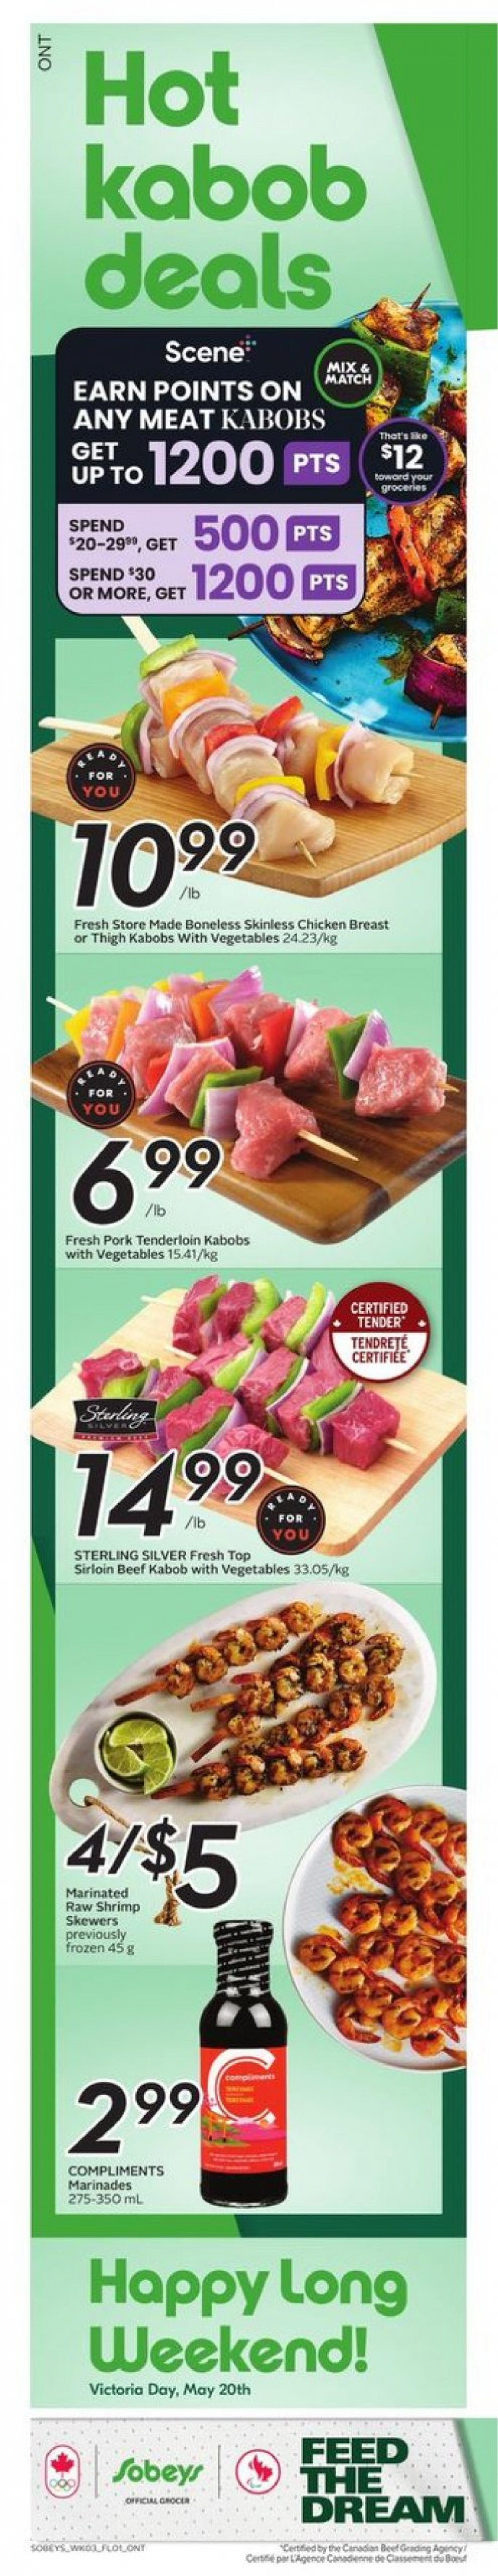 sobeys - Sobeys - Weekly Flyer - Ontario flyer current 16.05. - 22.05. - page: 2